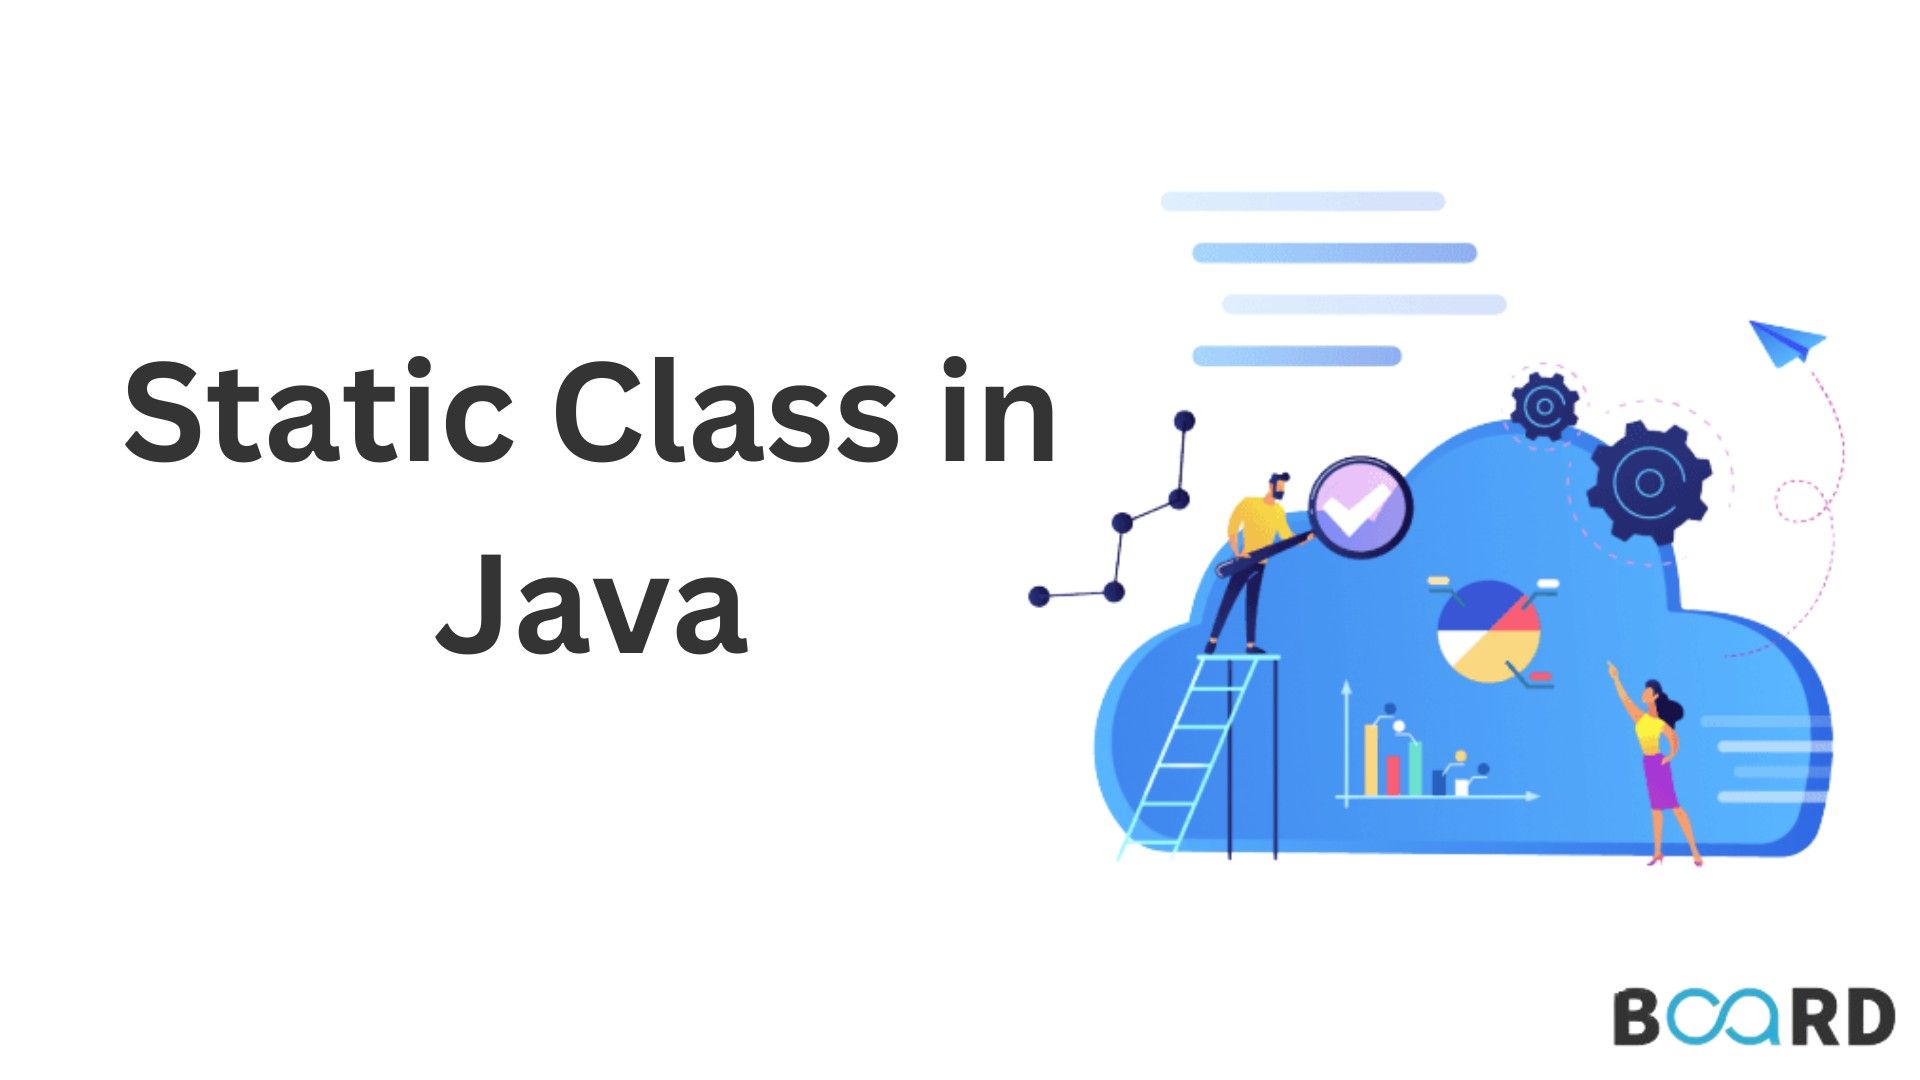 What is Static Class in JAVA?